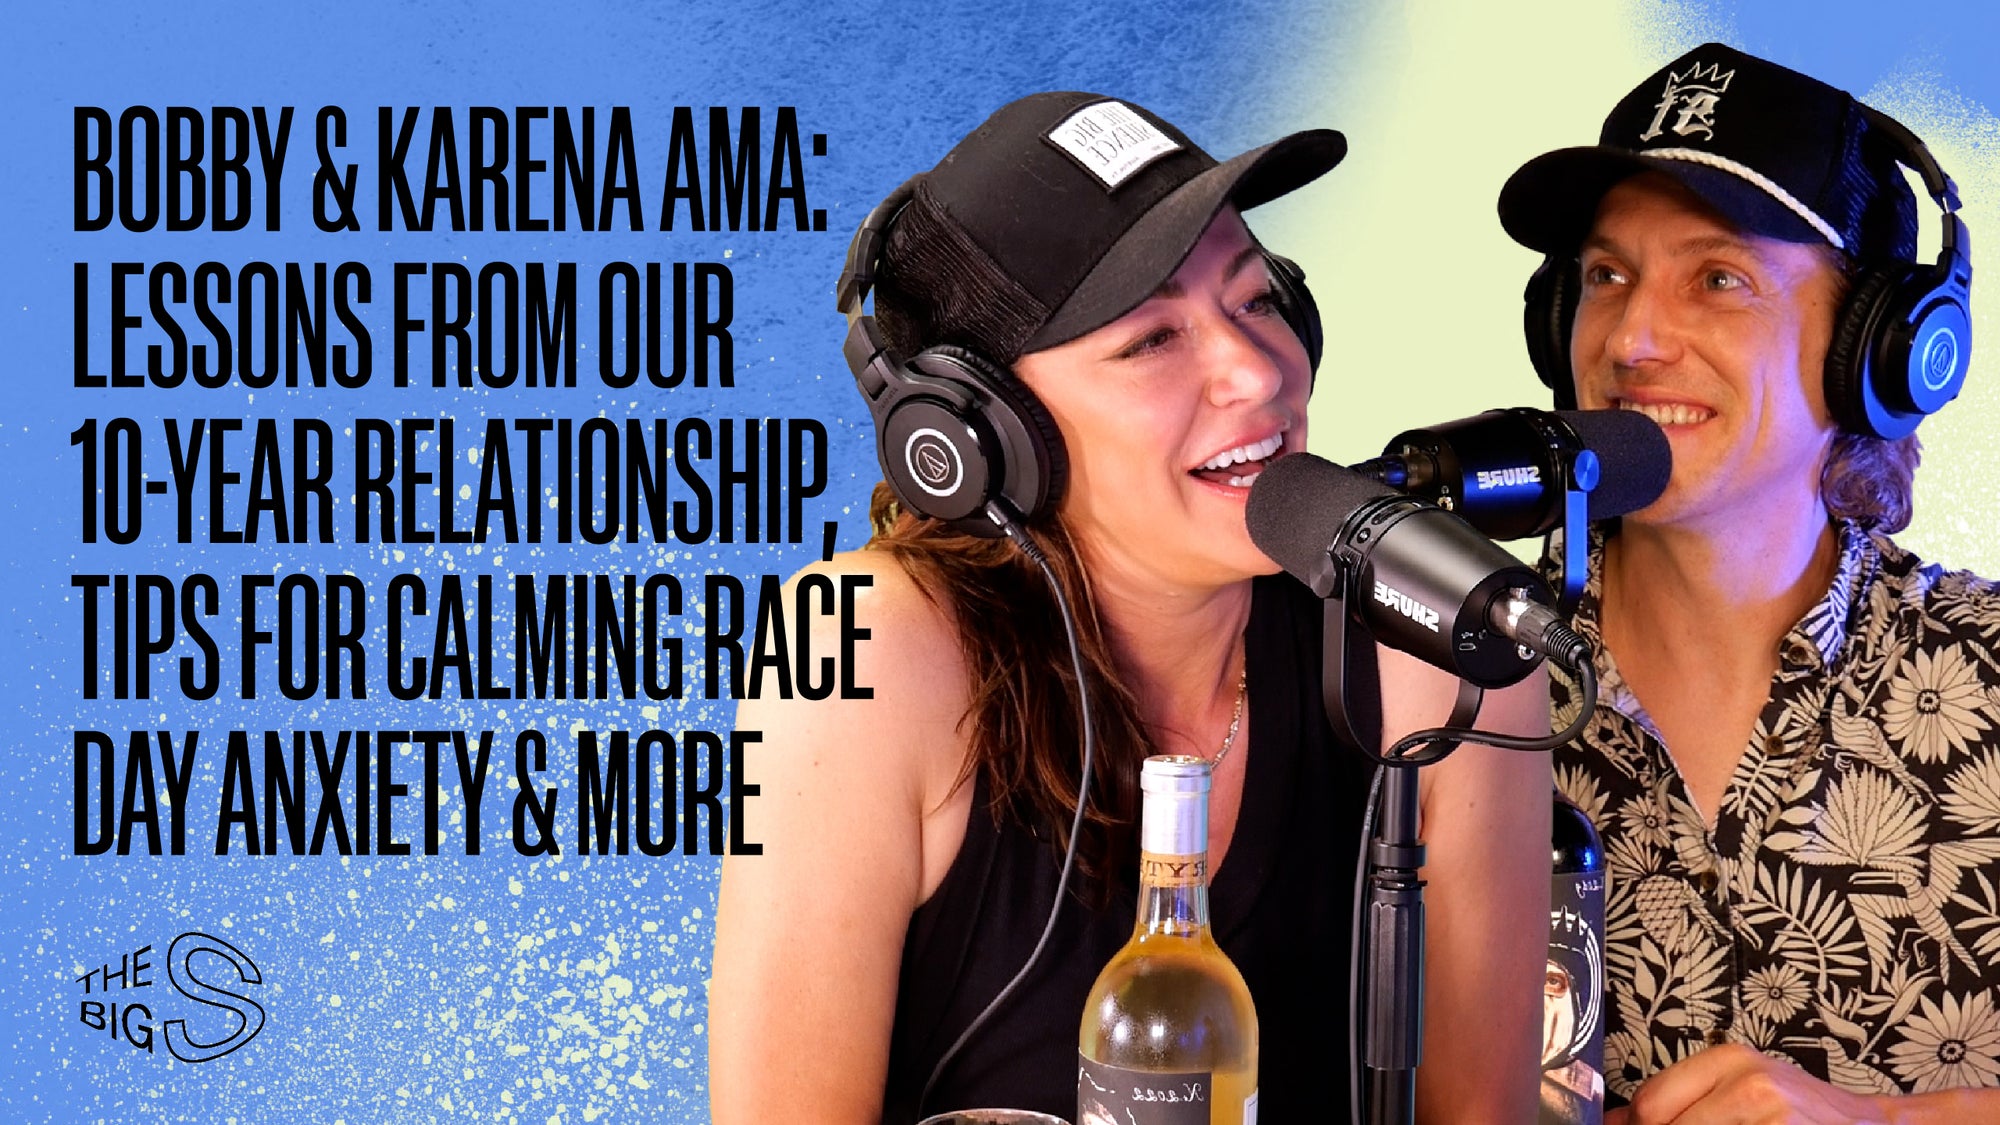 64. Bobby & Karena AMA: Lessons from Our 10-Year Relationship, Tips for Calming Race Day Anxiety & More